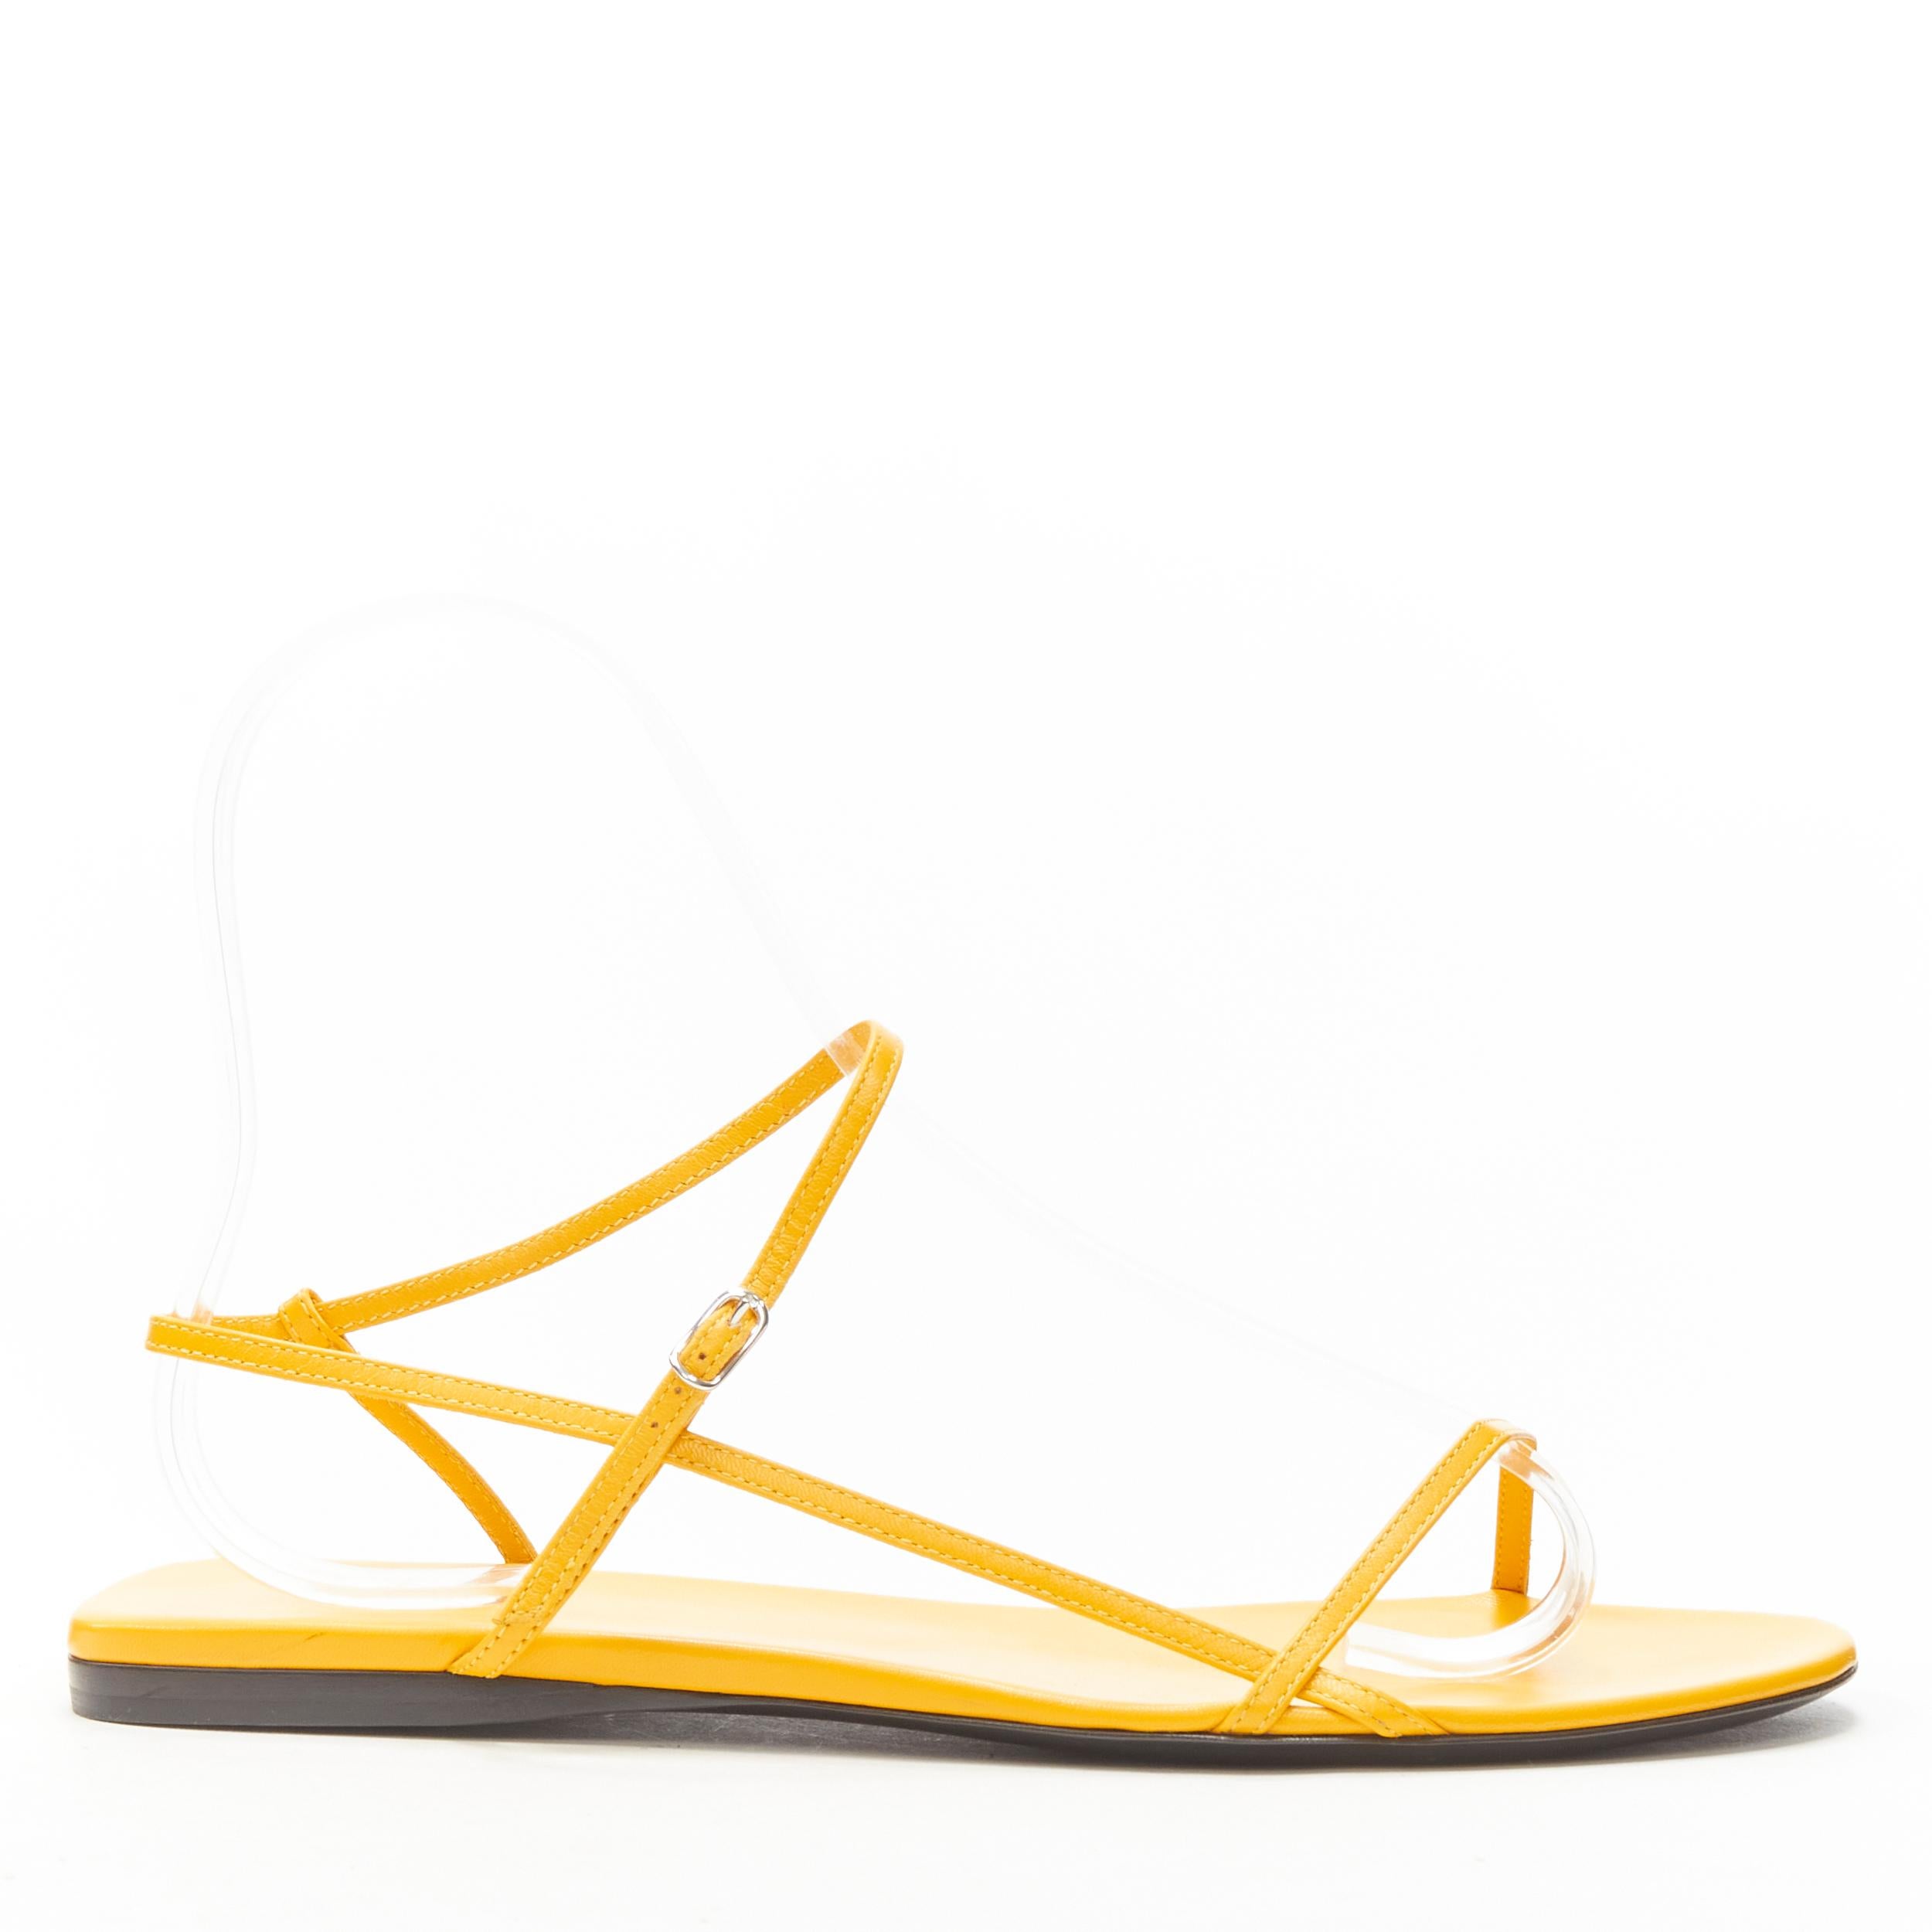 new THE ROW Bare Flat Sandal  mustard yellow kid leather minimal slides EU37.5
Brand: The Row
Designer: Mary Kate and Ashley Olsen
Model: Flat Bare Sandal
Material: Leather
Color: Yellow
Pattern: Solid
Closure: Ankle Strap
Extra Detail: Designer